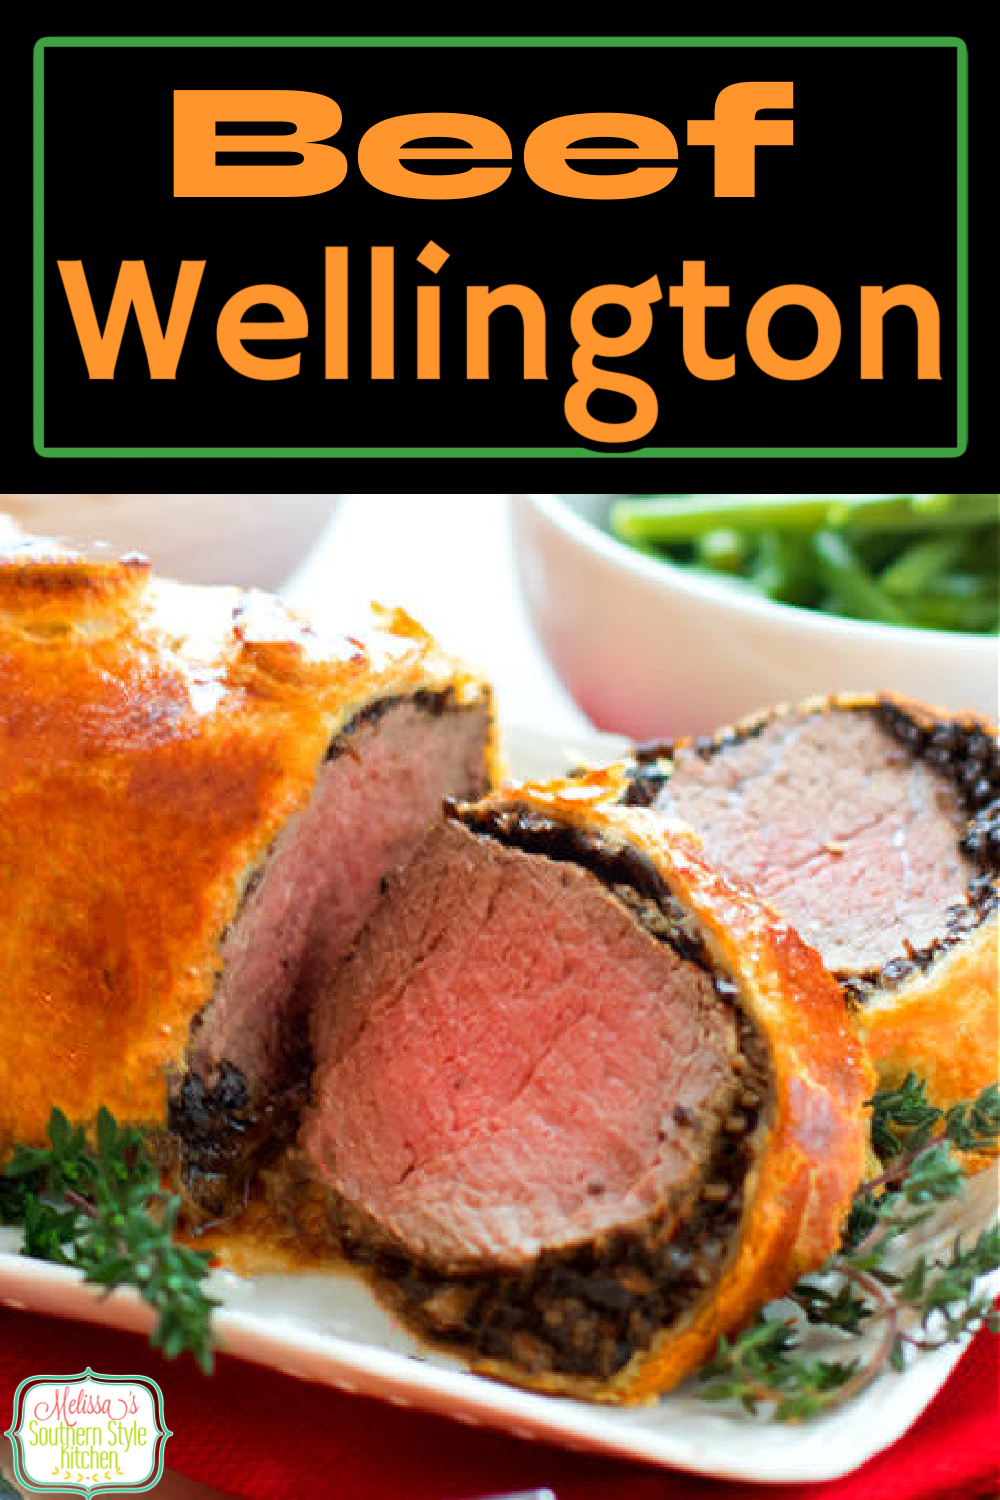 Melt in your mouth Beef Wellington is a special dish for a special occasion #beef #beefwellington #puffpastry #puffpastryrecipes #beefrecipes #beeftenderloin #Christmasdinner #newyearseve #dinnerideas #dinner #southernfood #southernrecipes #mushrooms #puffpastry via @melissasssk